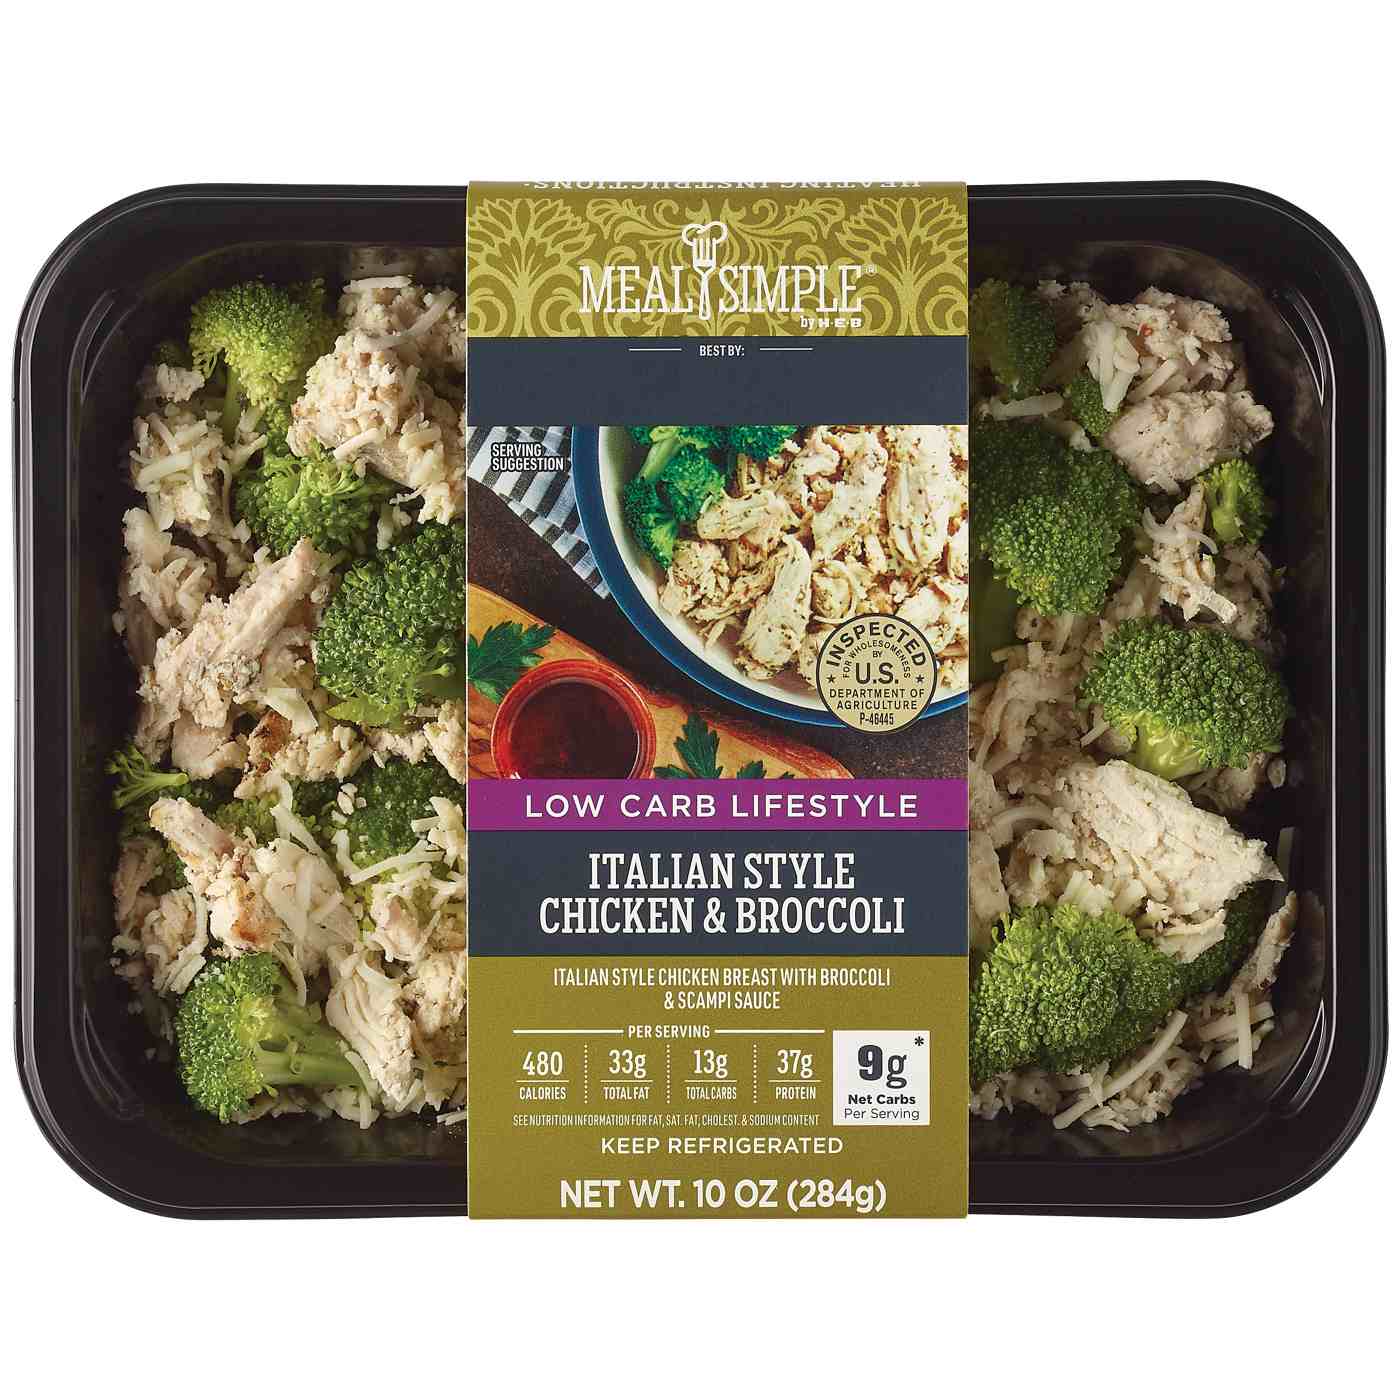 Meal Simple by H-E-B Low-Carb Lifestyle Italian-Style Chicken & Broccoli; image 2 of 3